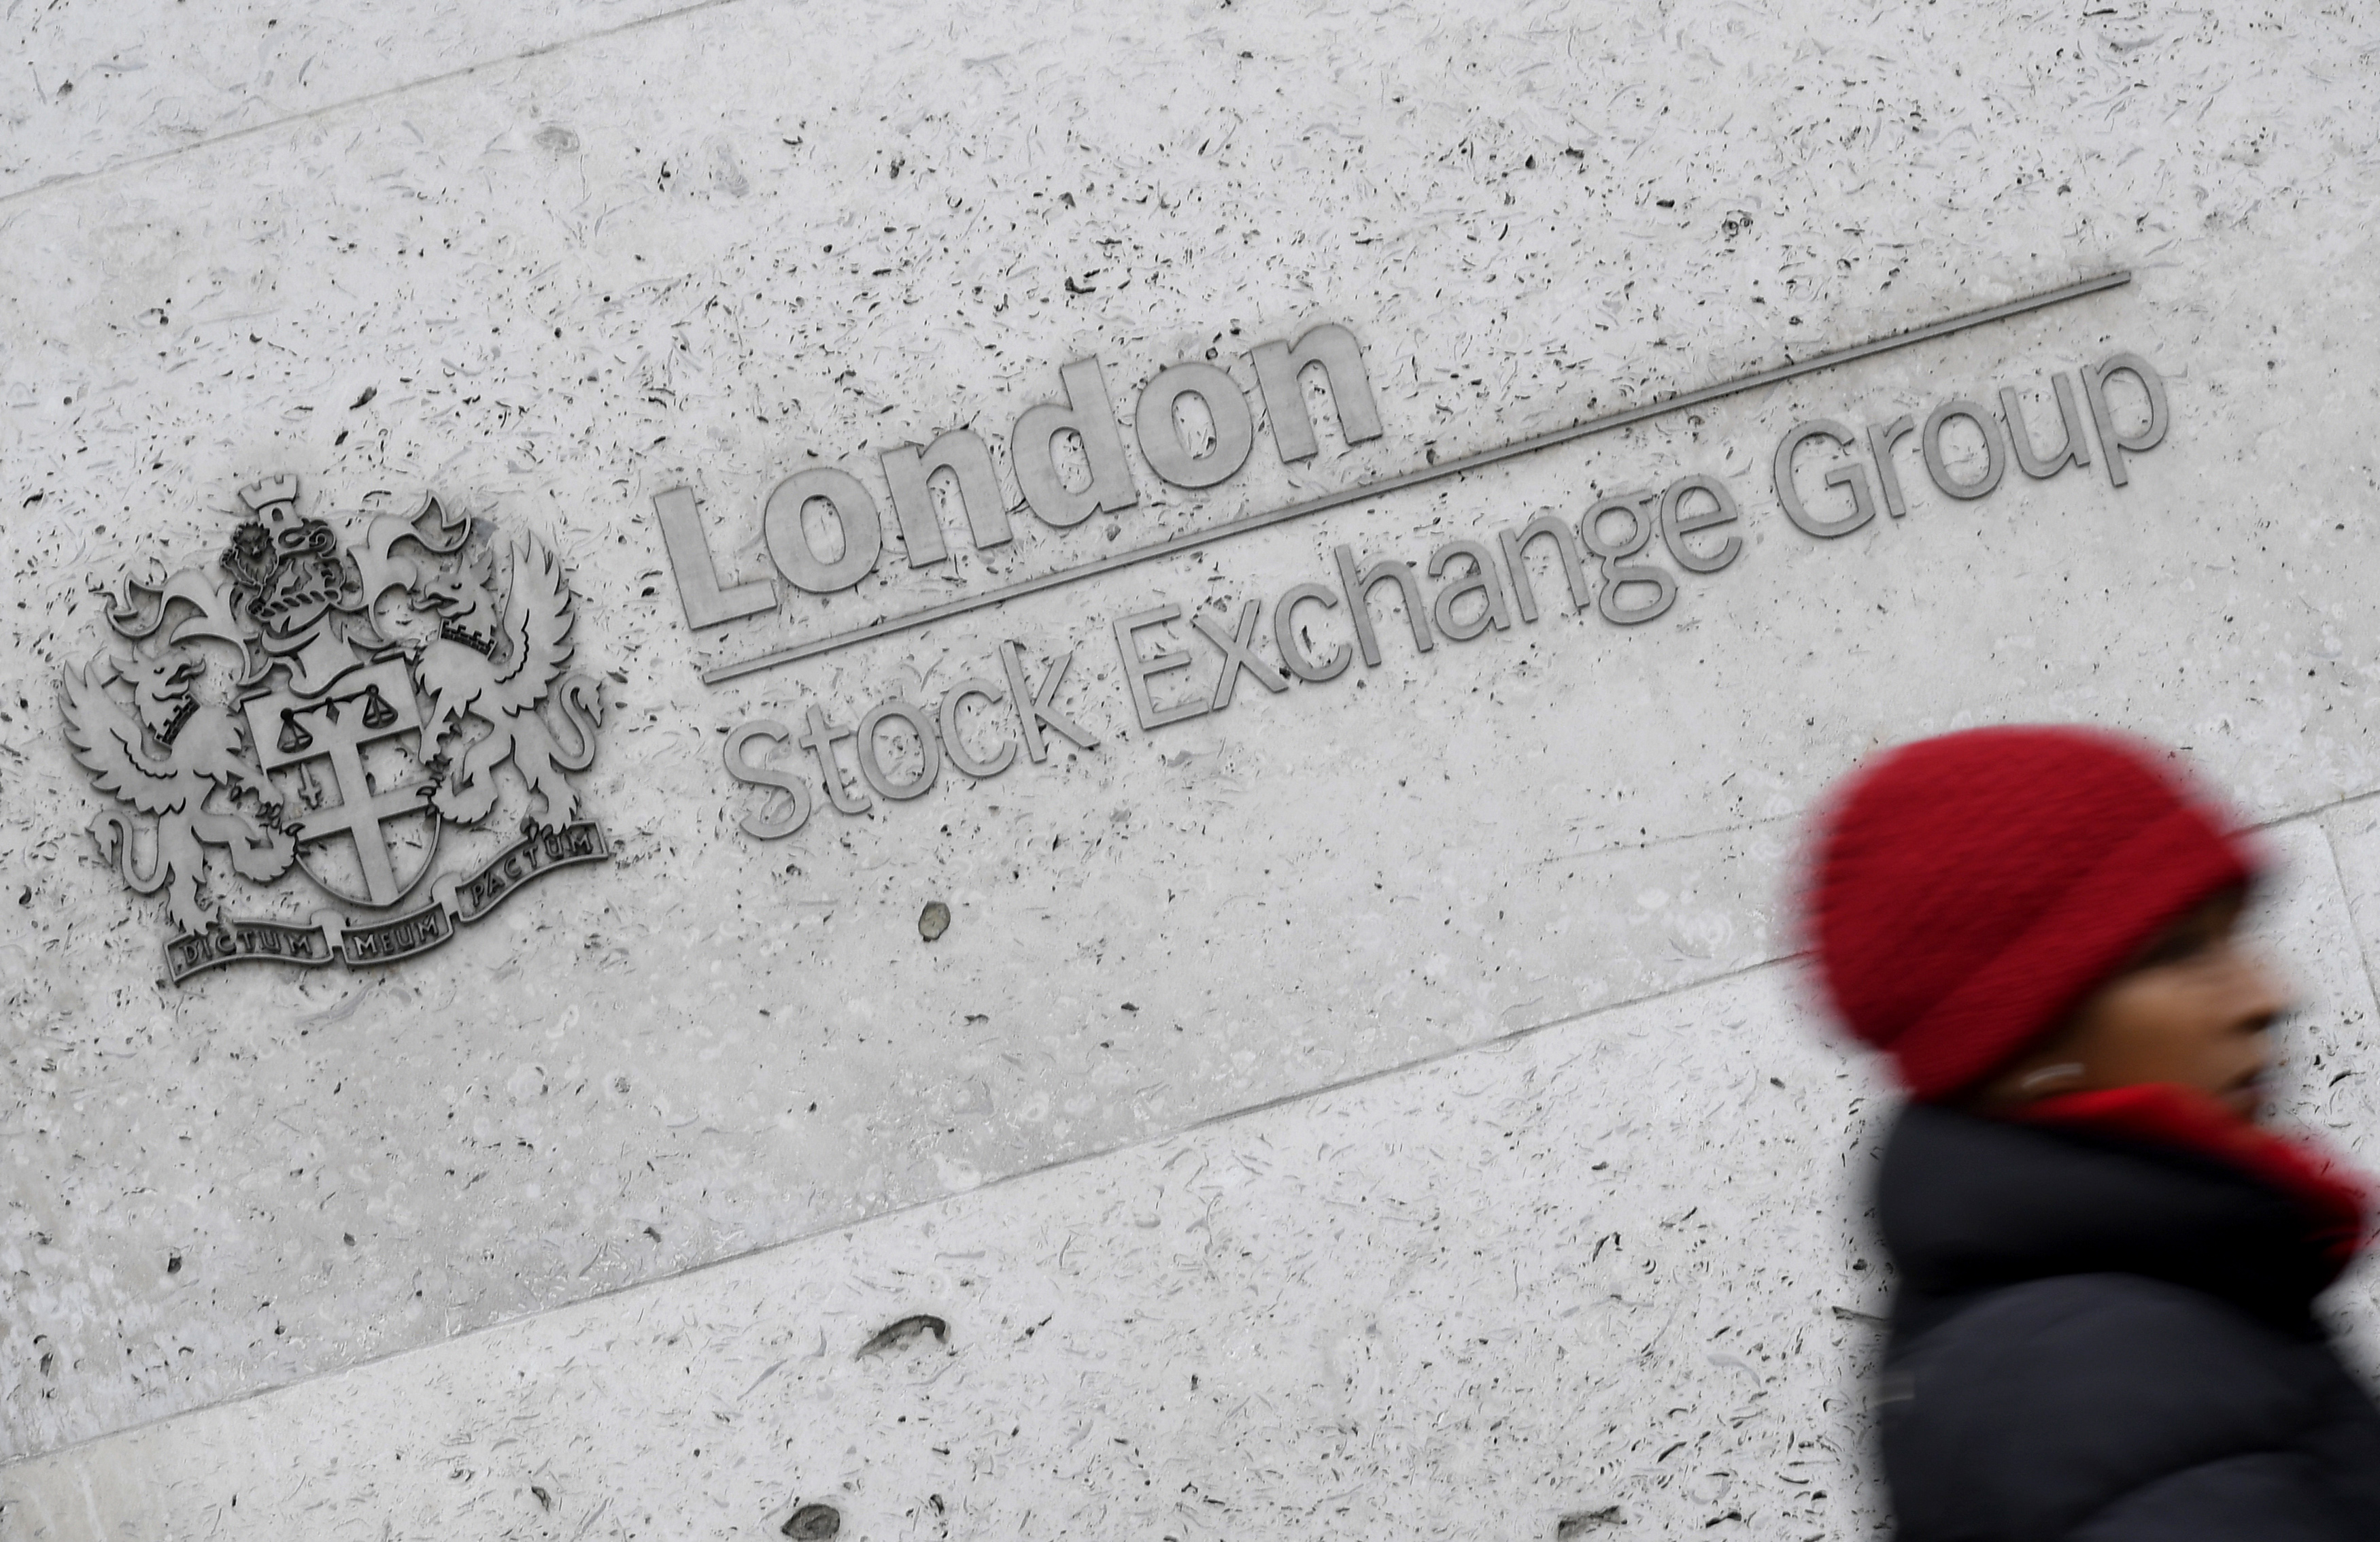 A woman walks past the London Stock Exchange building in the City of London, Britain